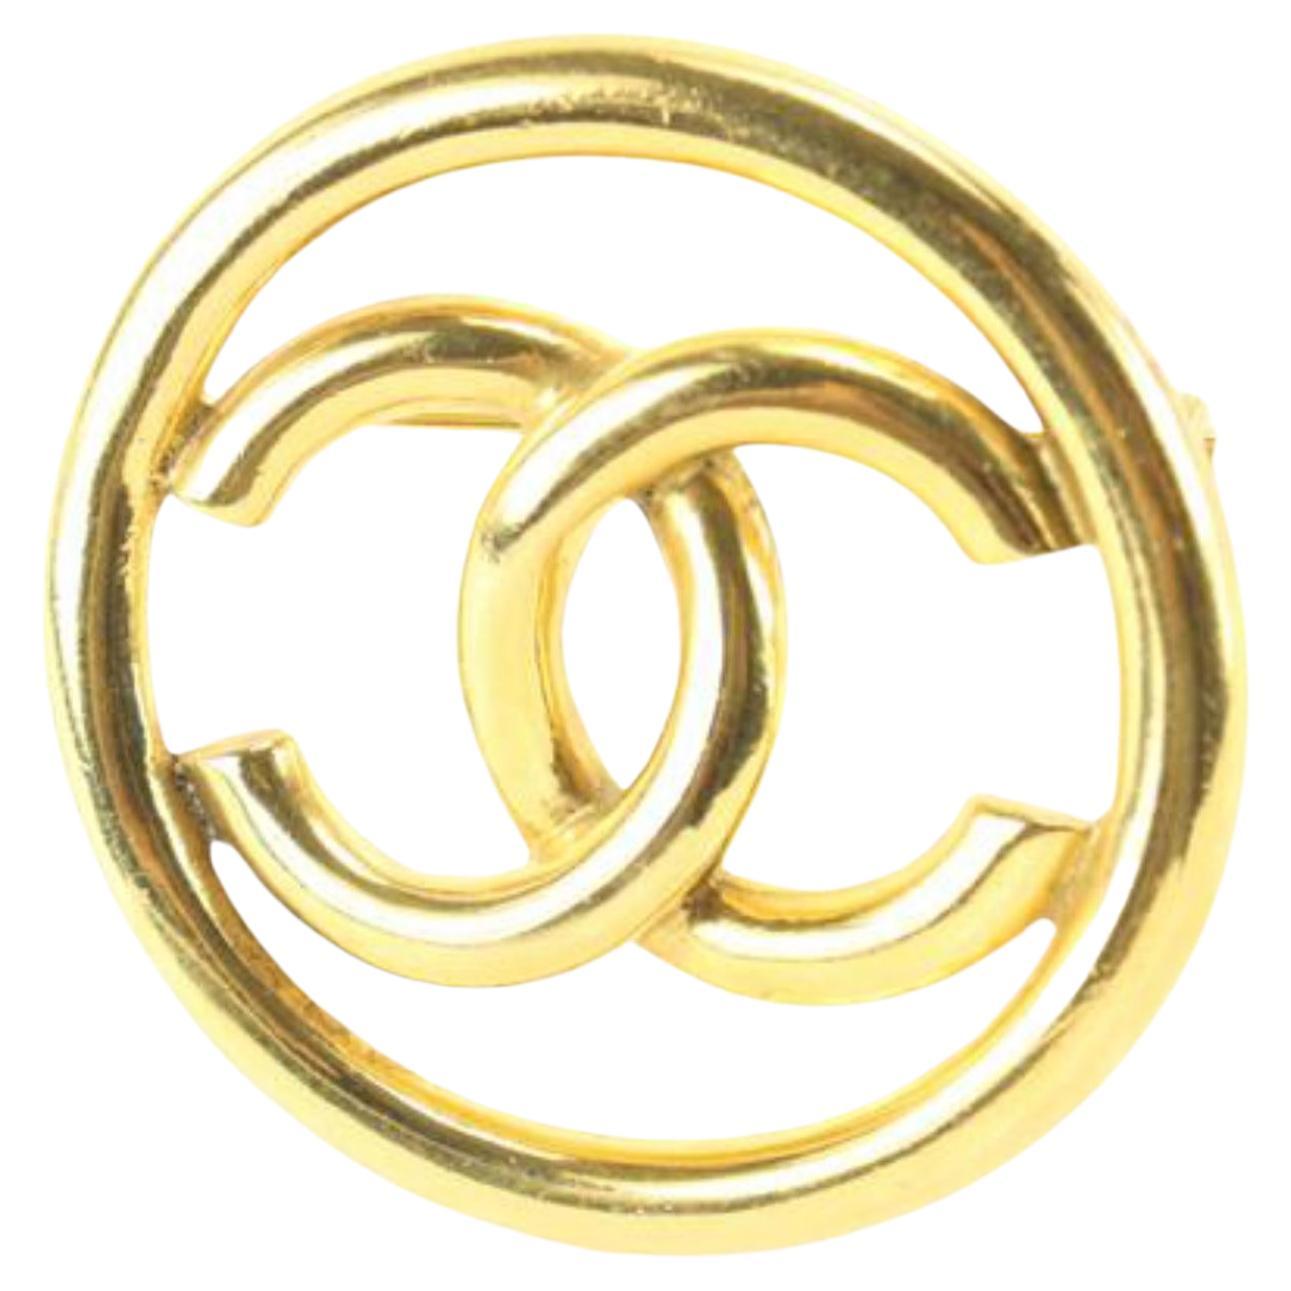 Chanel 93P 24k Gold Plate CC Logo Circle Brooch Pin 31ck824s For Sale